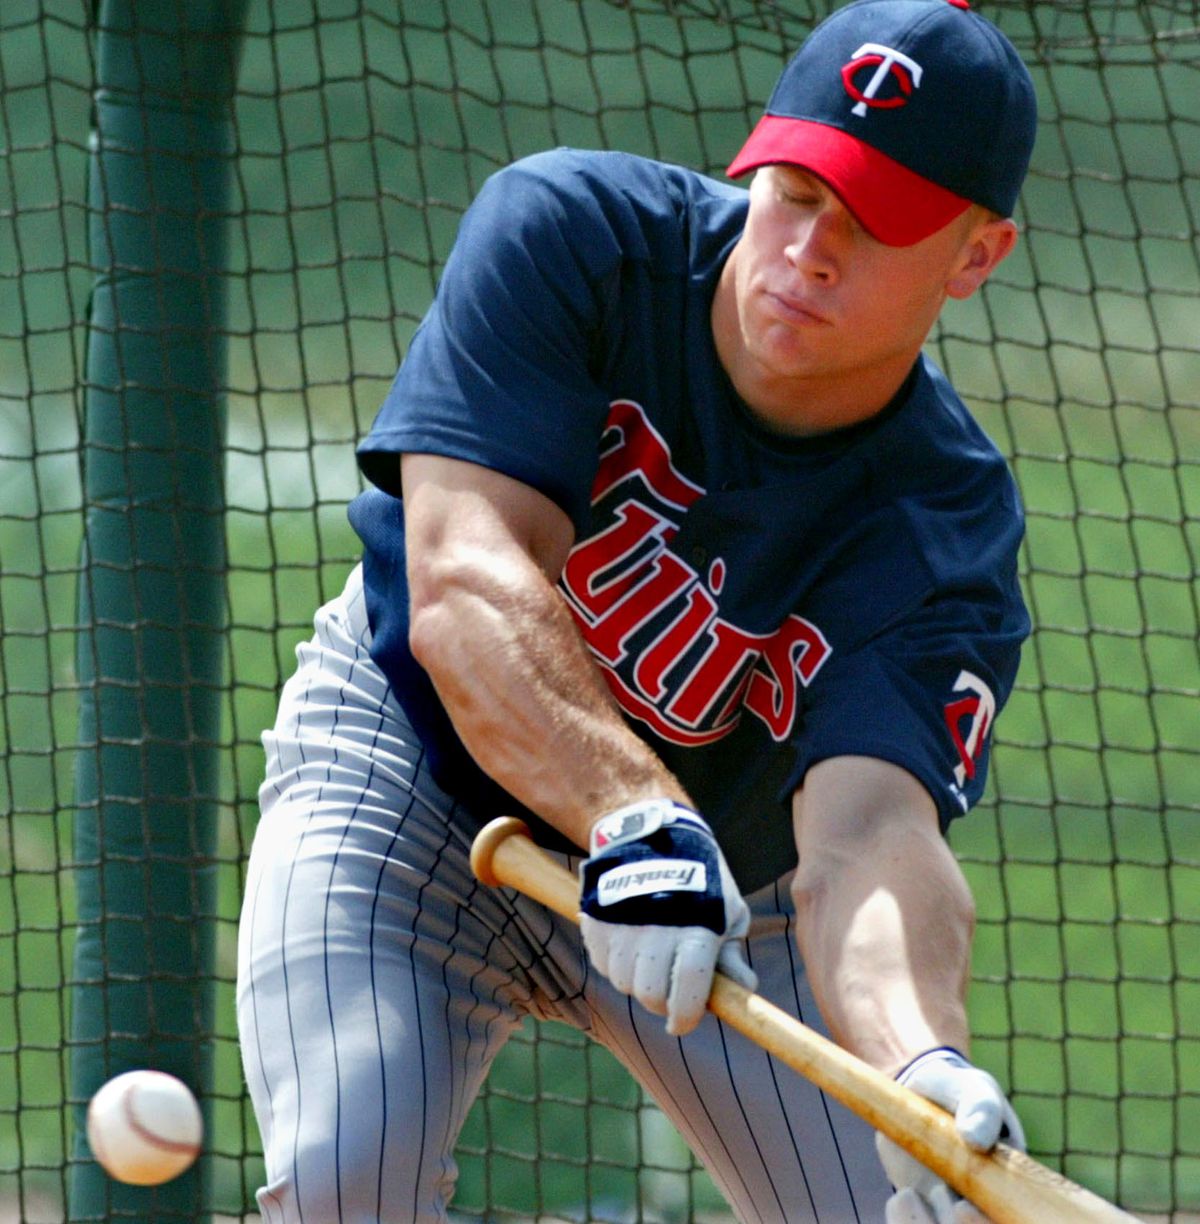 Justin Morneau (shown here) — Ft. Myers, Fla - Twins Spring Training - For Sunday, March 2, 2003 - For the first time, big money contracts and rising young talent may be chipping away at the Twins happy family atmosphere. Justin Morneau, shown here bunt